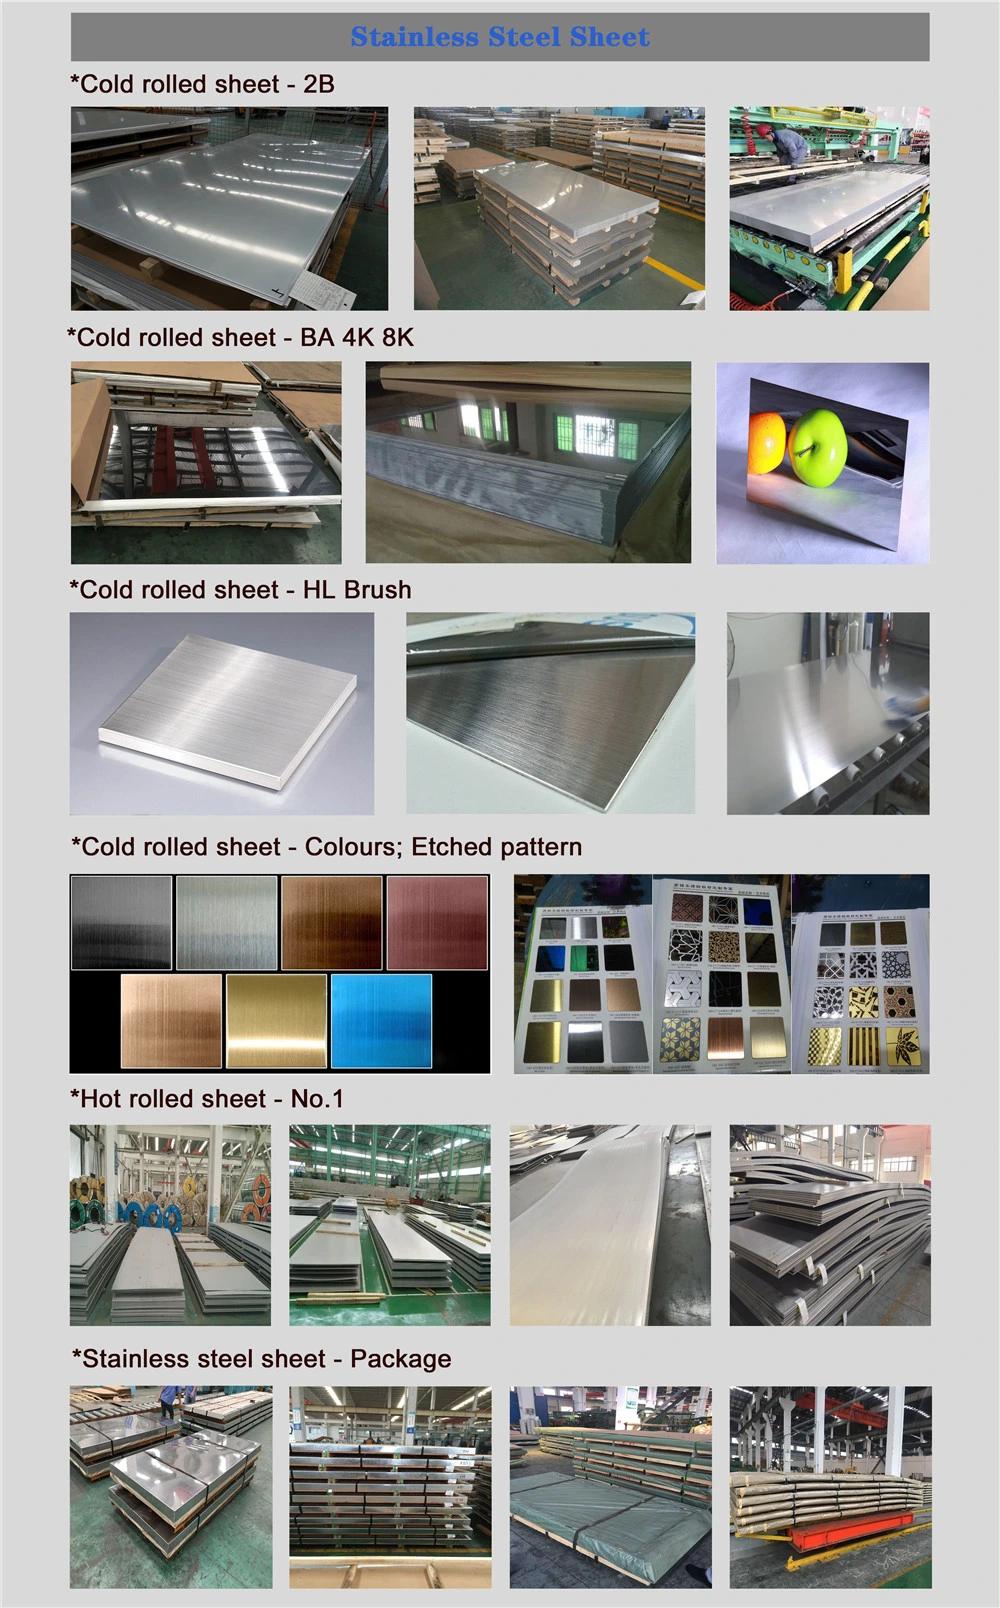 Inox Cold Rolled Stainless Steel Sheet 304 2b Stainless Steel Sheet with Fast shipment